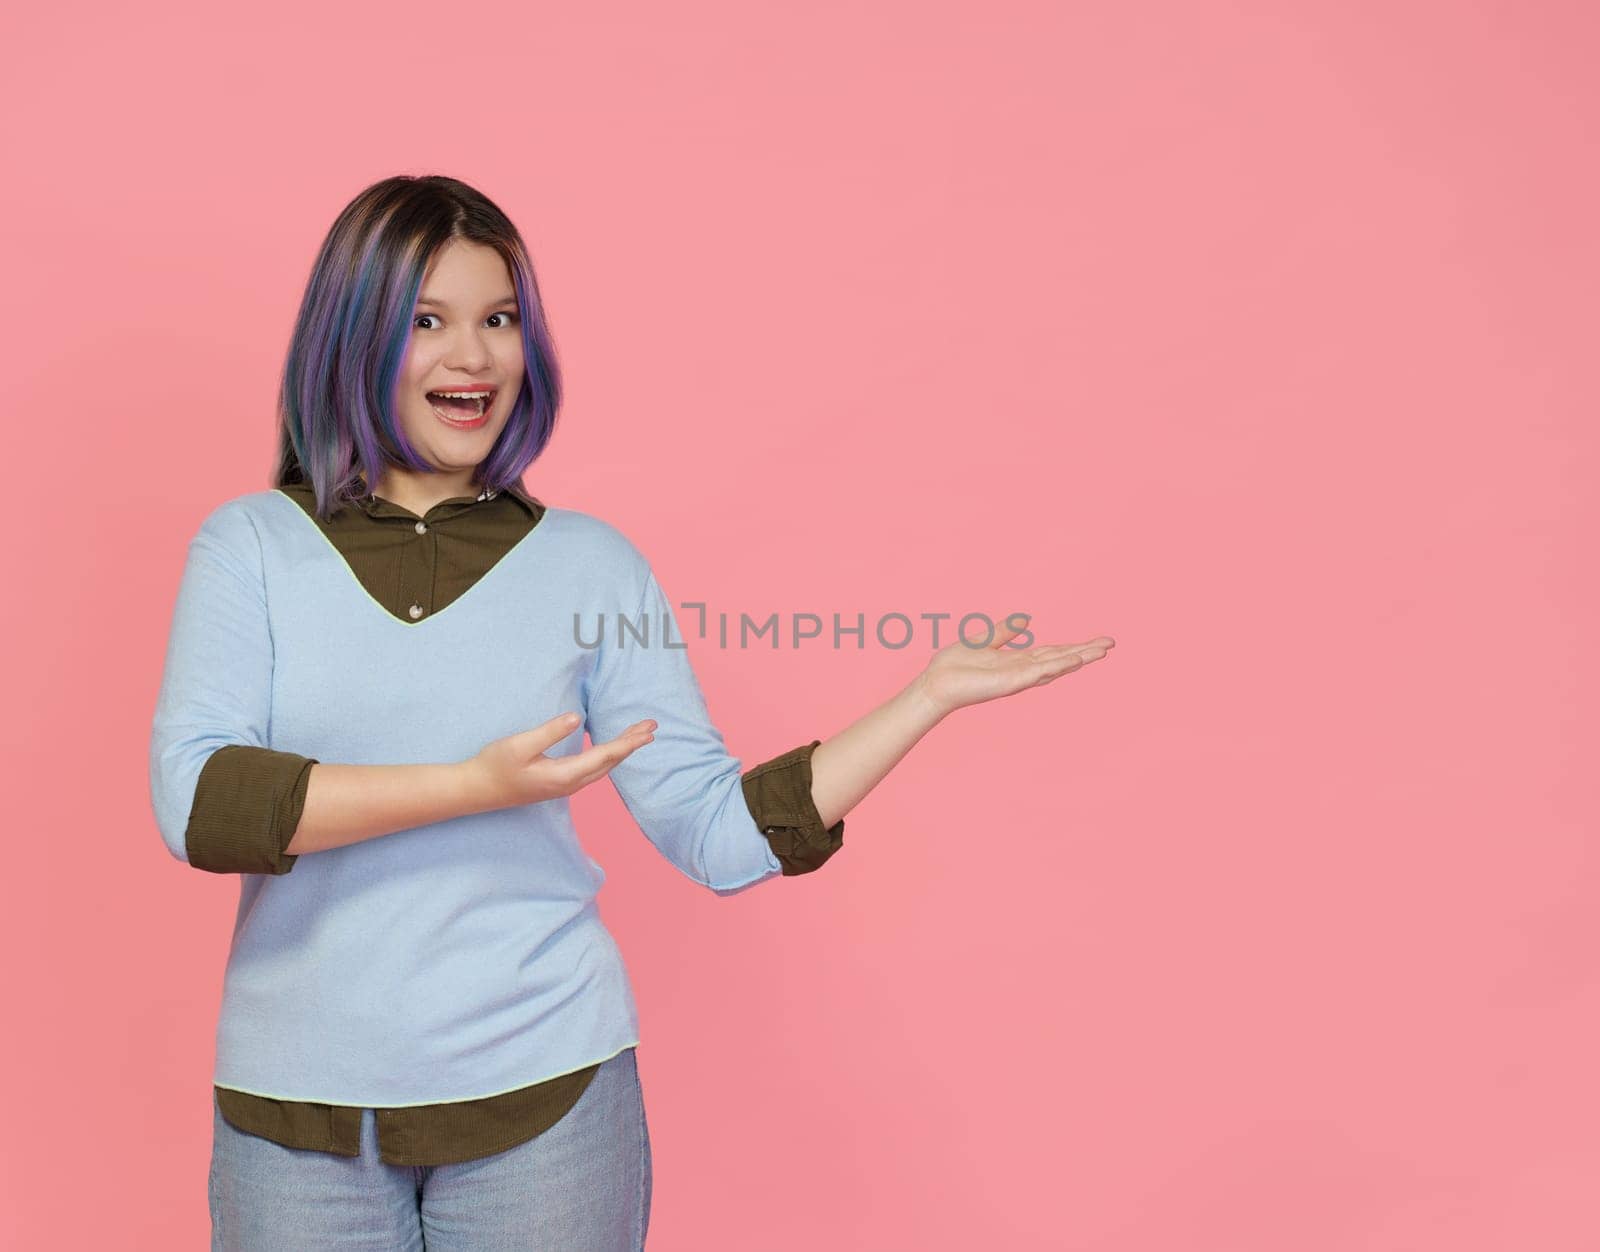 Teenager Girl Extends Friendly Welcome With Smile, Showcasing Empty Copy Space With Hands On Pink Background. Essence Of Friendly And Approachable Teenager Extending Warm Welcome To Viewer. by LipikStockMedia